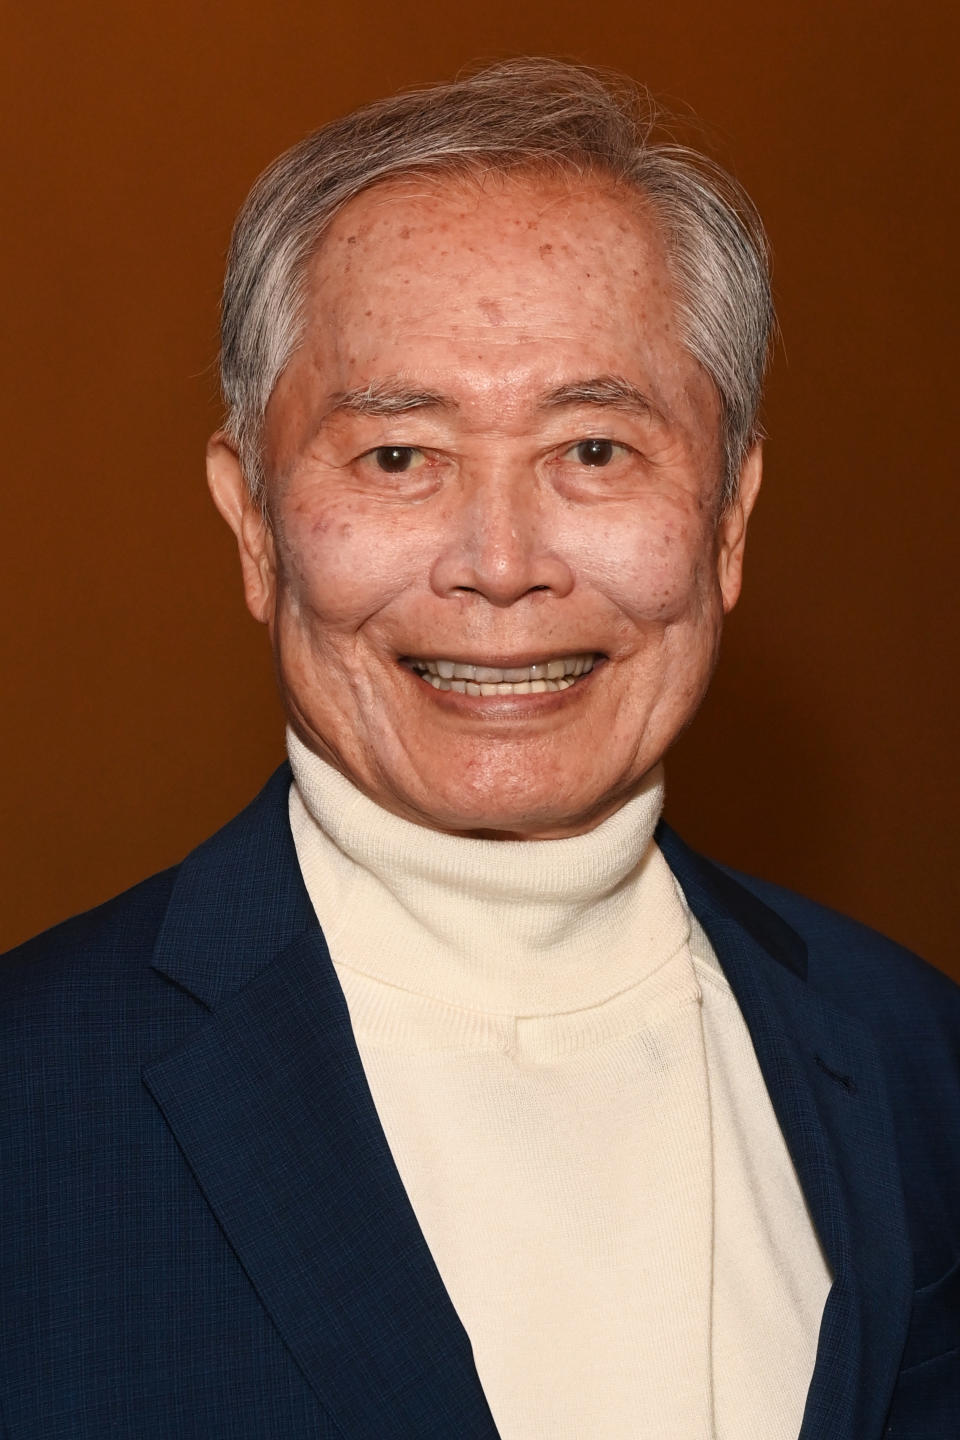 George Takei attends the press night performance of "George Takei's Allegiance" at the Charing Cross Theatre